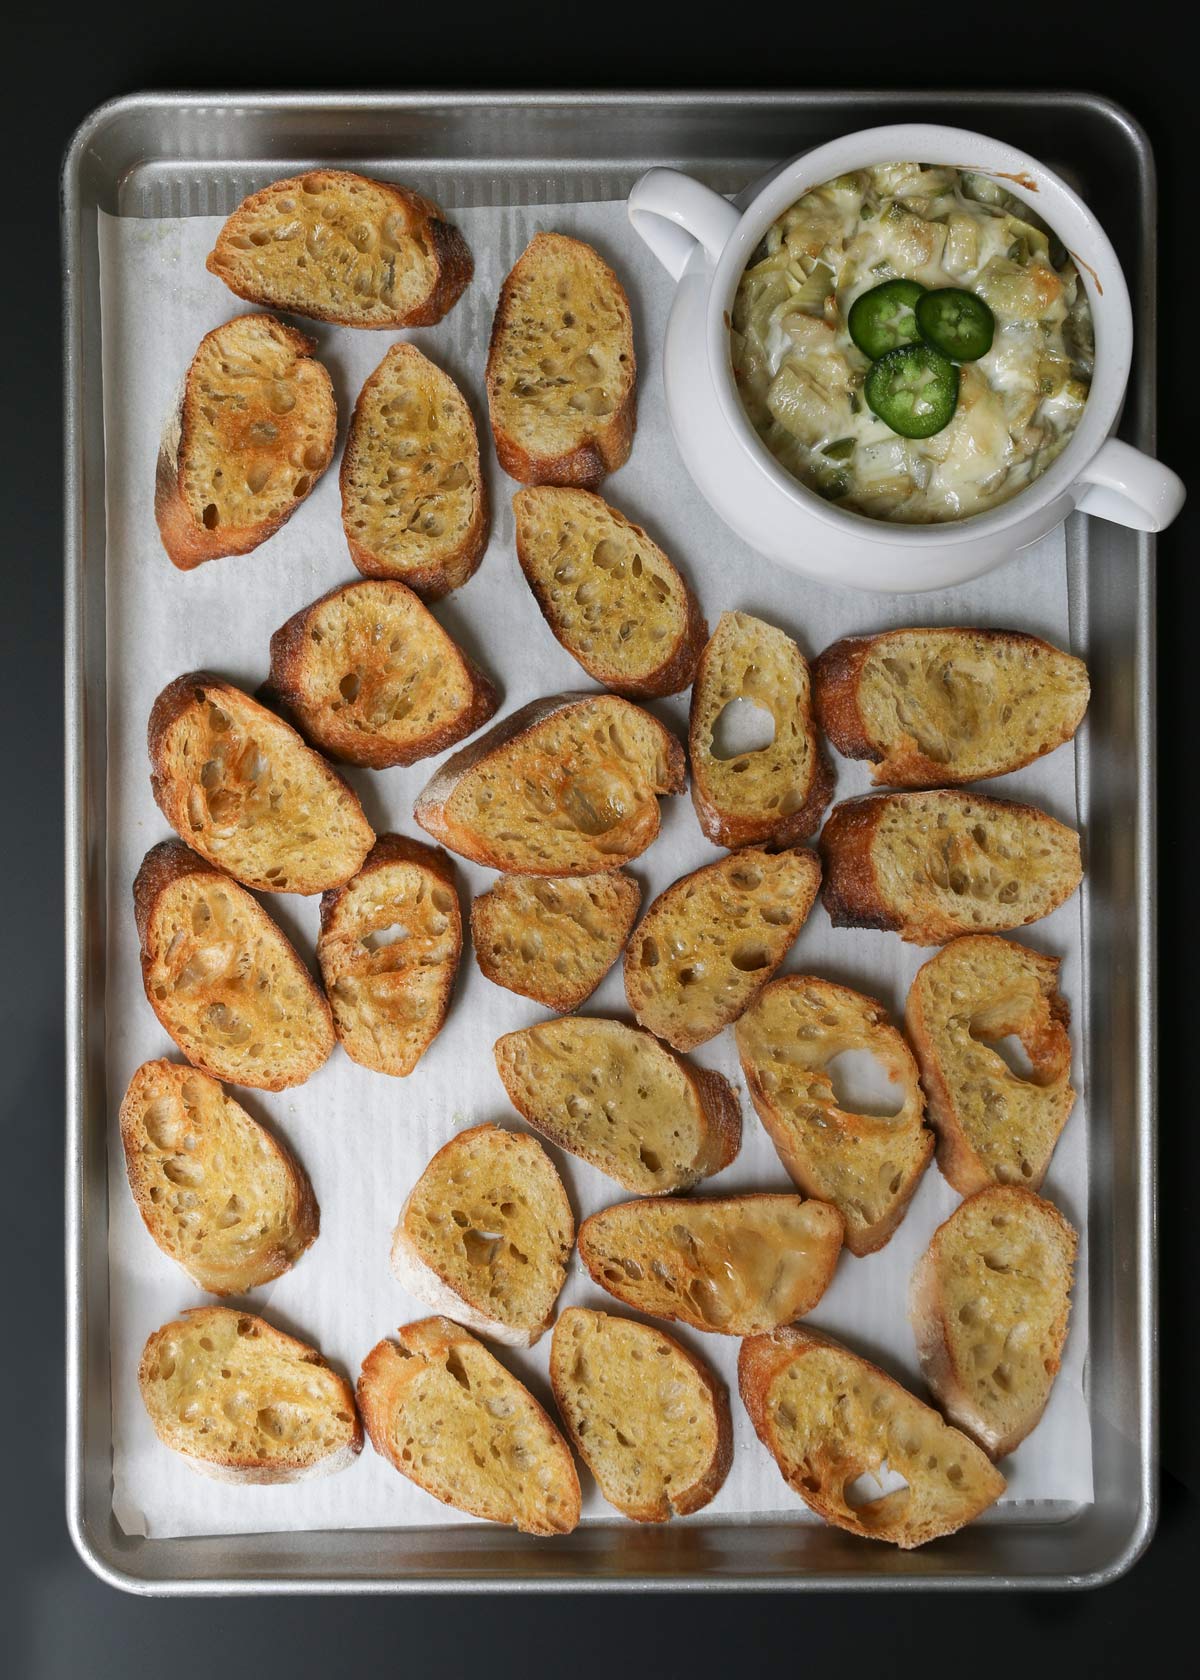 toasted baguette on sheet surrounding the baked dip, jalapeno slices have been added to the dip.